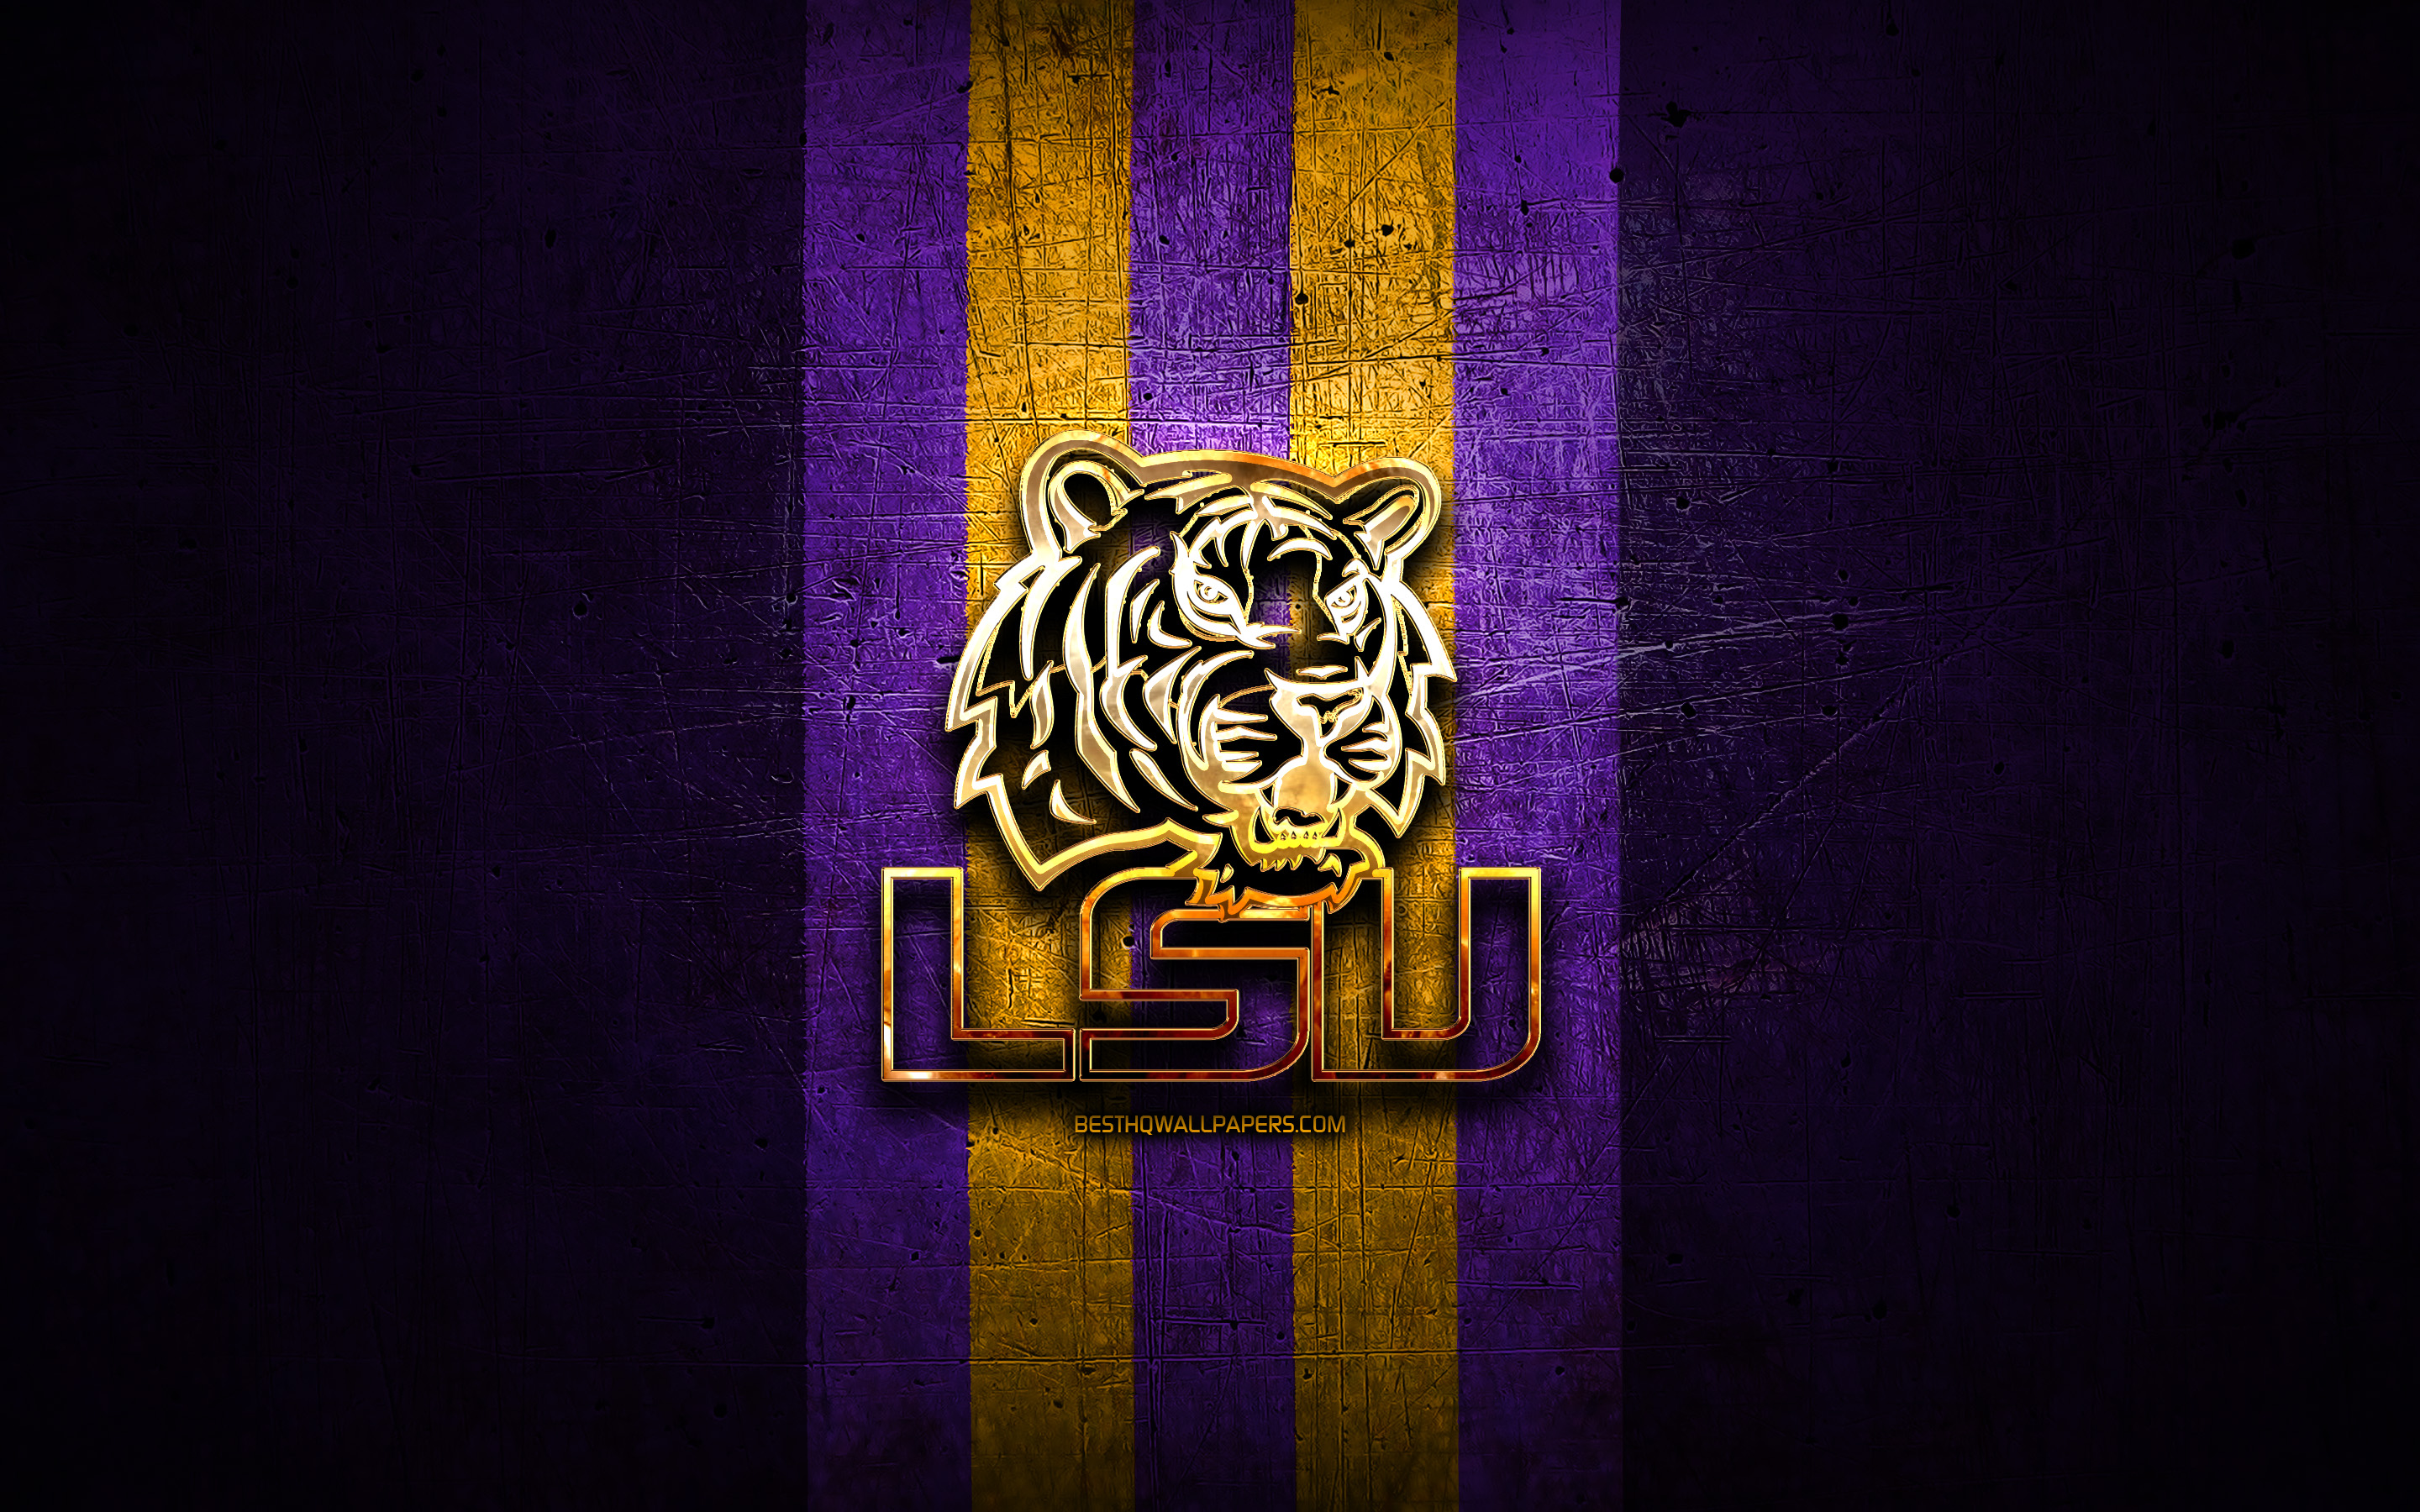 Download wallpaper LSU Tigers, golden logo, NCAA, violet metal background, american football club, LSU Tigers logo, american football, USA for desktop with resolution 2880x1800. High Quality HD picture wallpaper